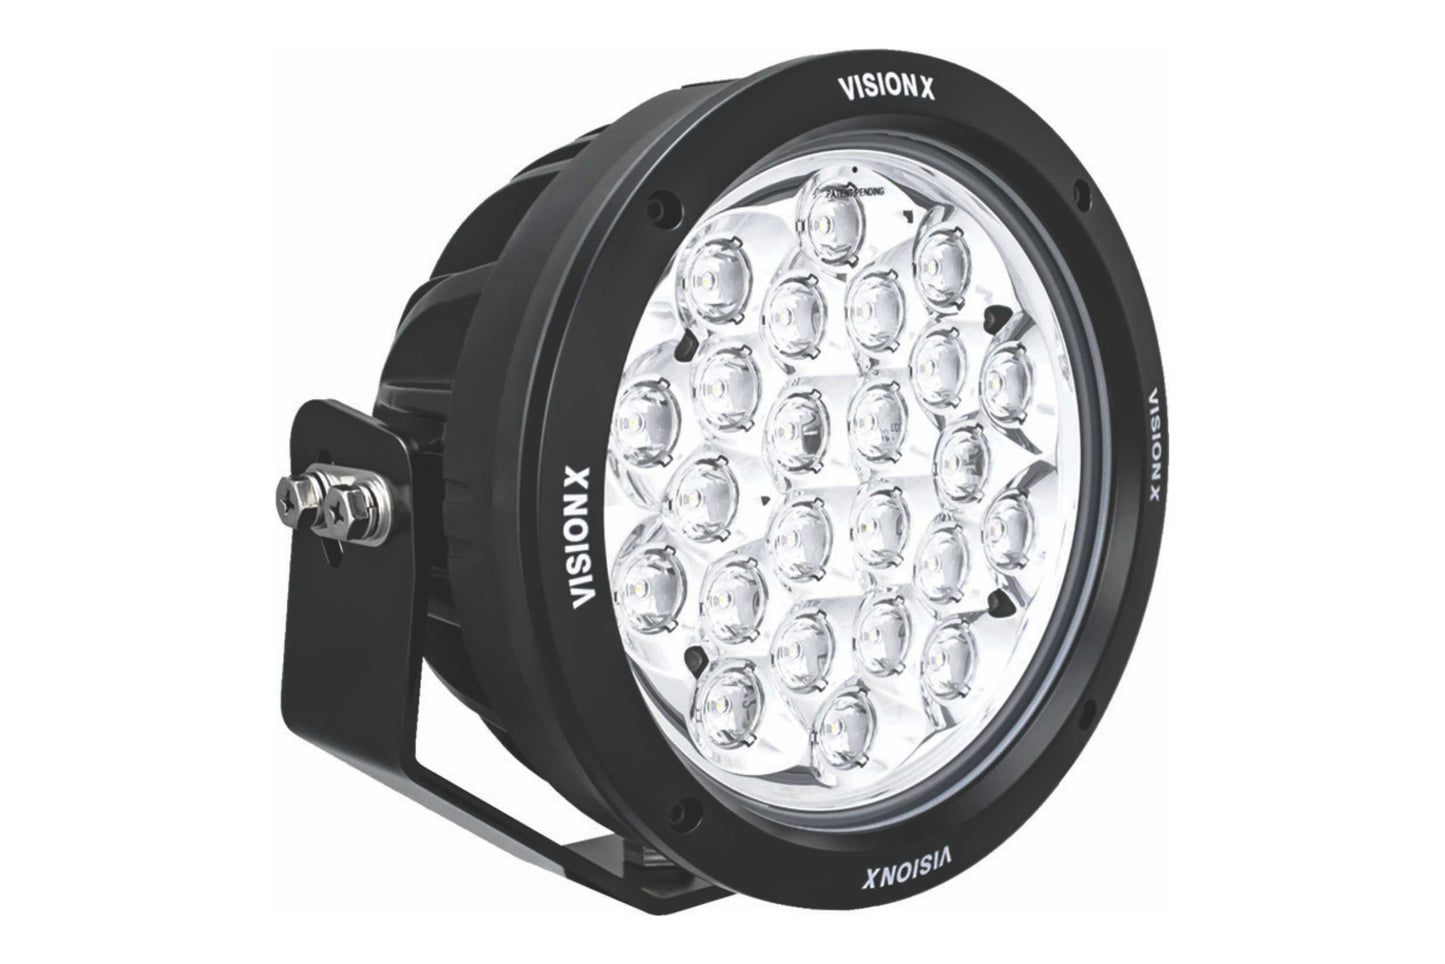 Vision X Cannon: 6.7in (1 50W LED / 10 Degree Narrow Beam)